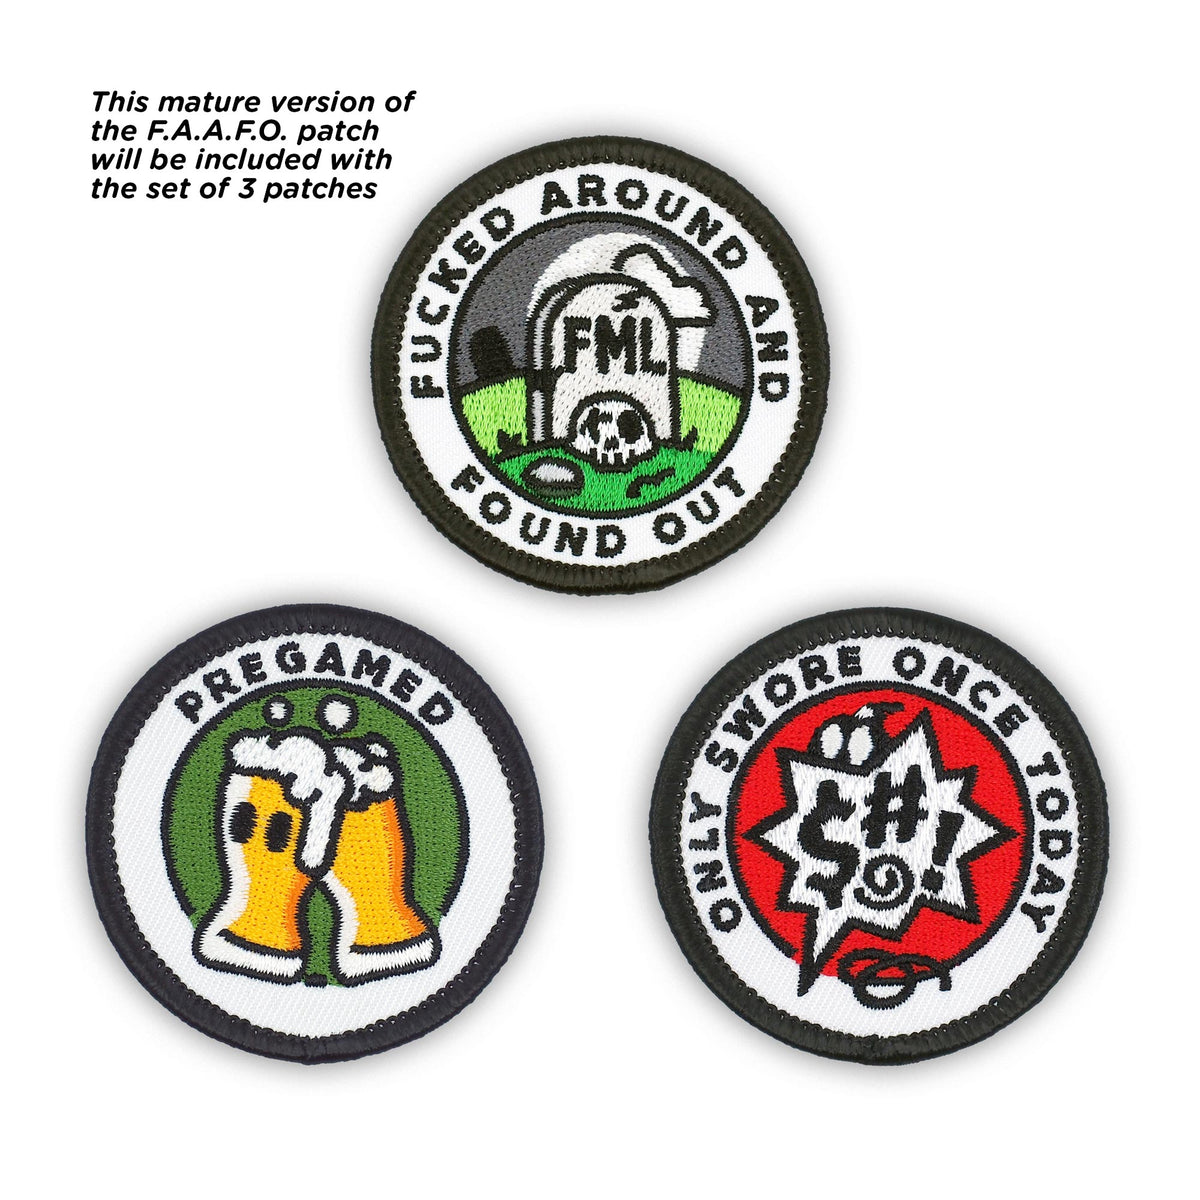  Winks For Days Adulting Merit Badge Embroidered Iron-On Patches  (Achievements - Set 2) - Includes Three (3) 2 Patches: Learned Something  New, Did It Myself, and Used a Coupon : Clothing